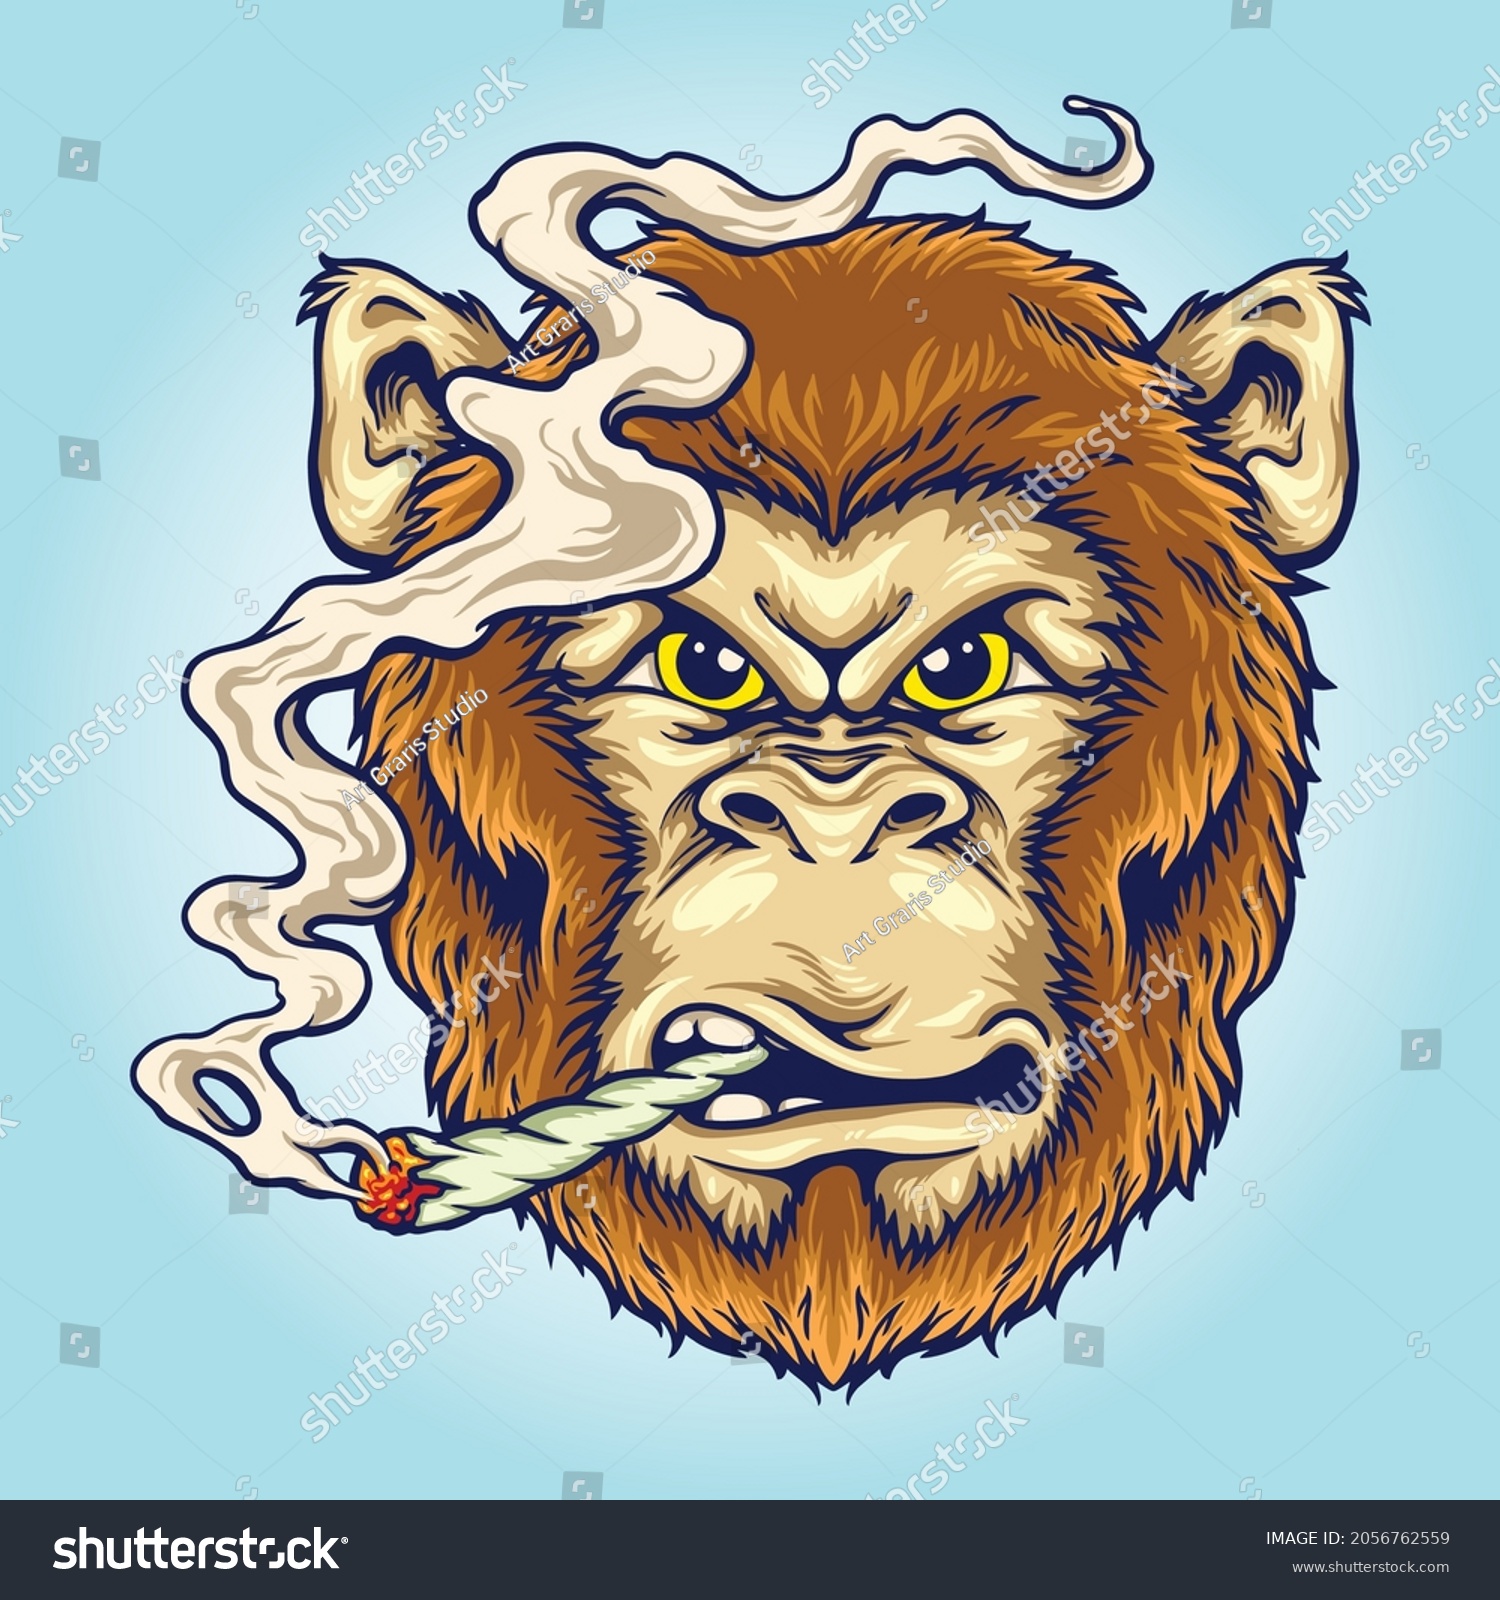 SVG of Smoke Angry Monkey Vector illustrations for your work Logo, mascot merchandise t-shirt, stickers and Label designs, poster, greeting cards advertising business company or brands. svg